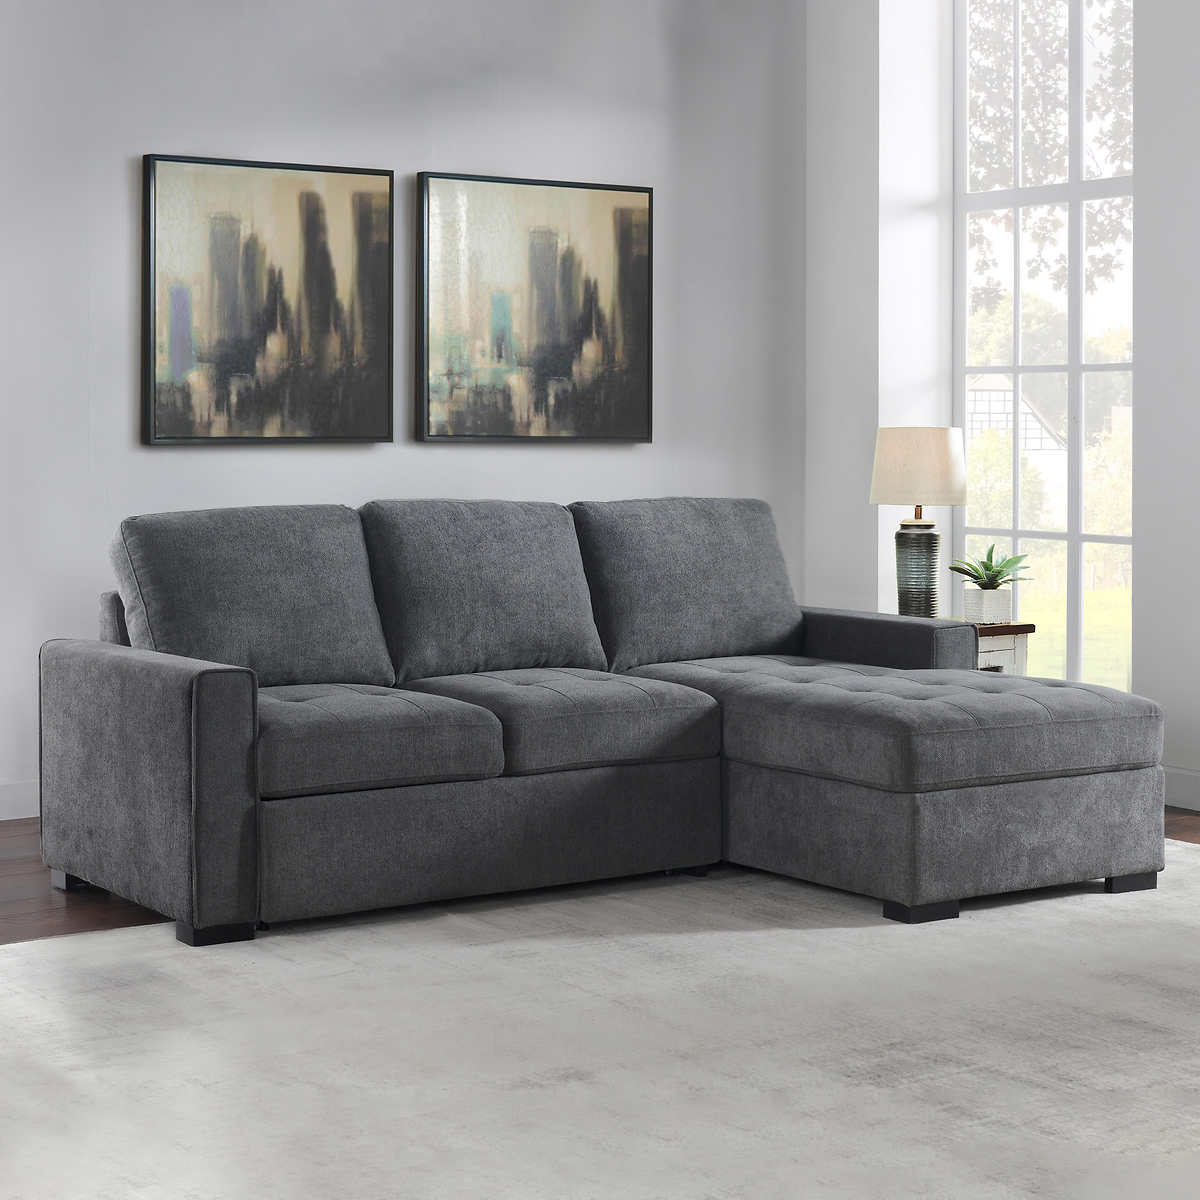 Kendale Sleeper Sofa With Storage, Bandlon Sofa Chaise With Pull Out Sleeper And Storage